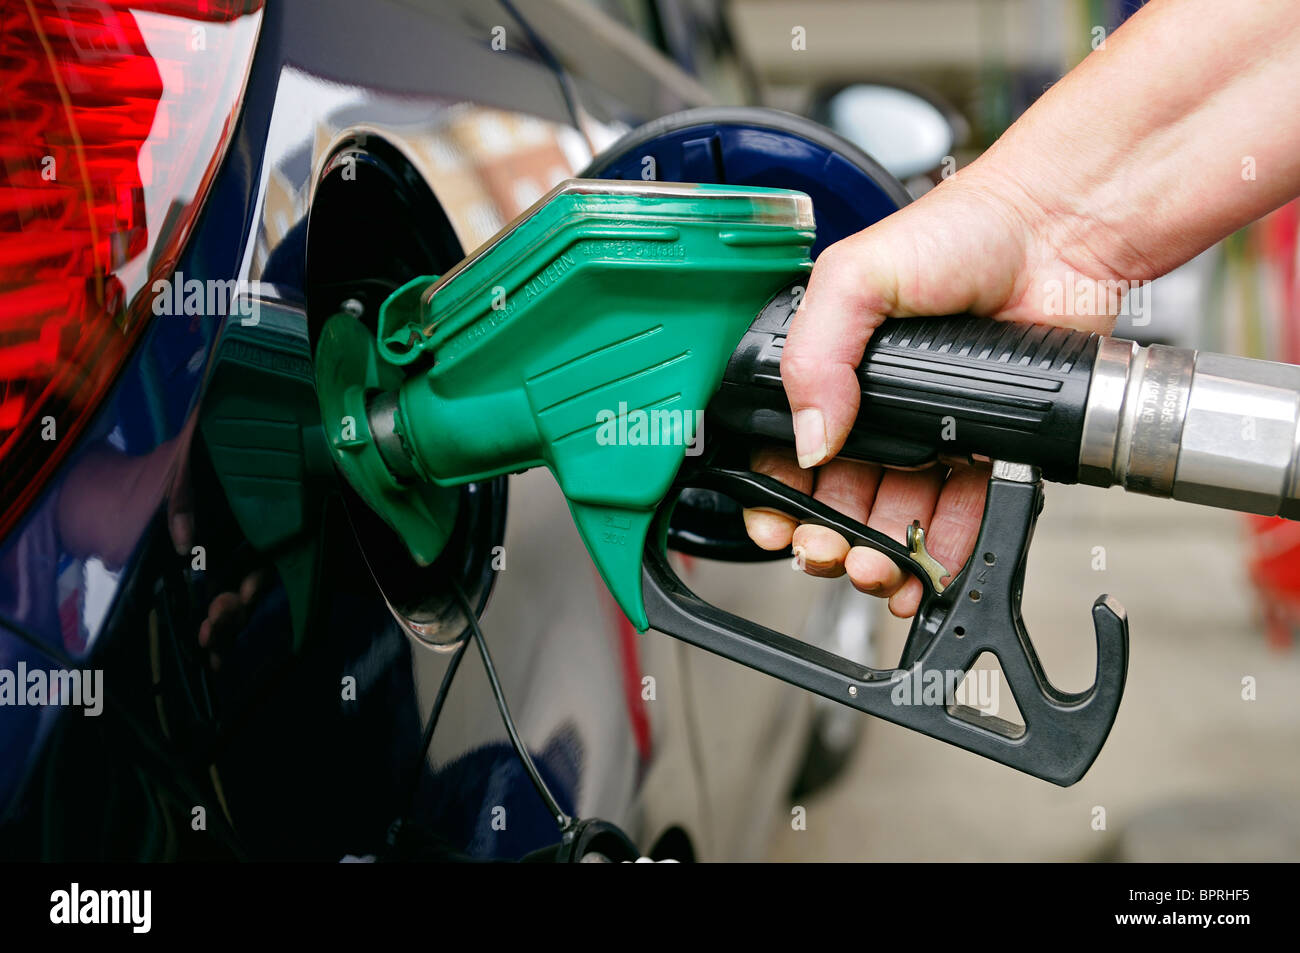 Woman Filling a Car with Unleaded Petrol, UK. Stock Photo